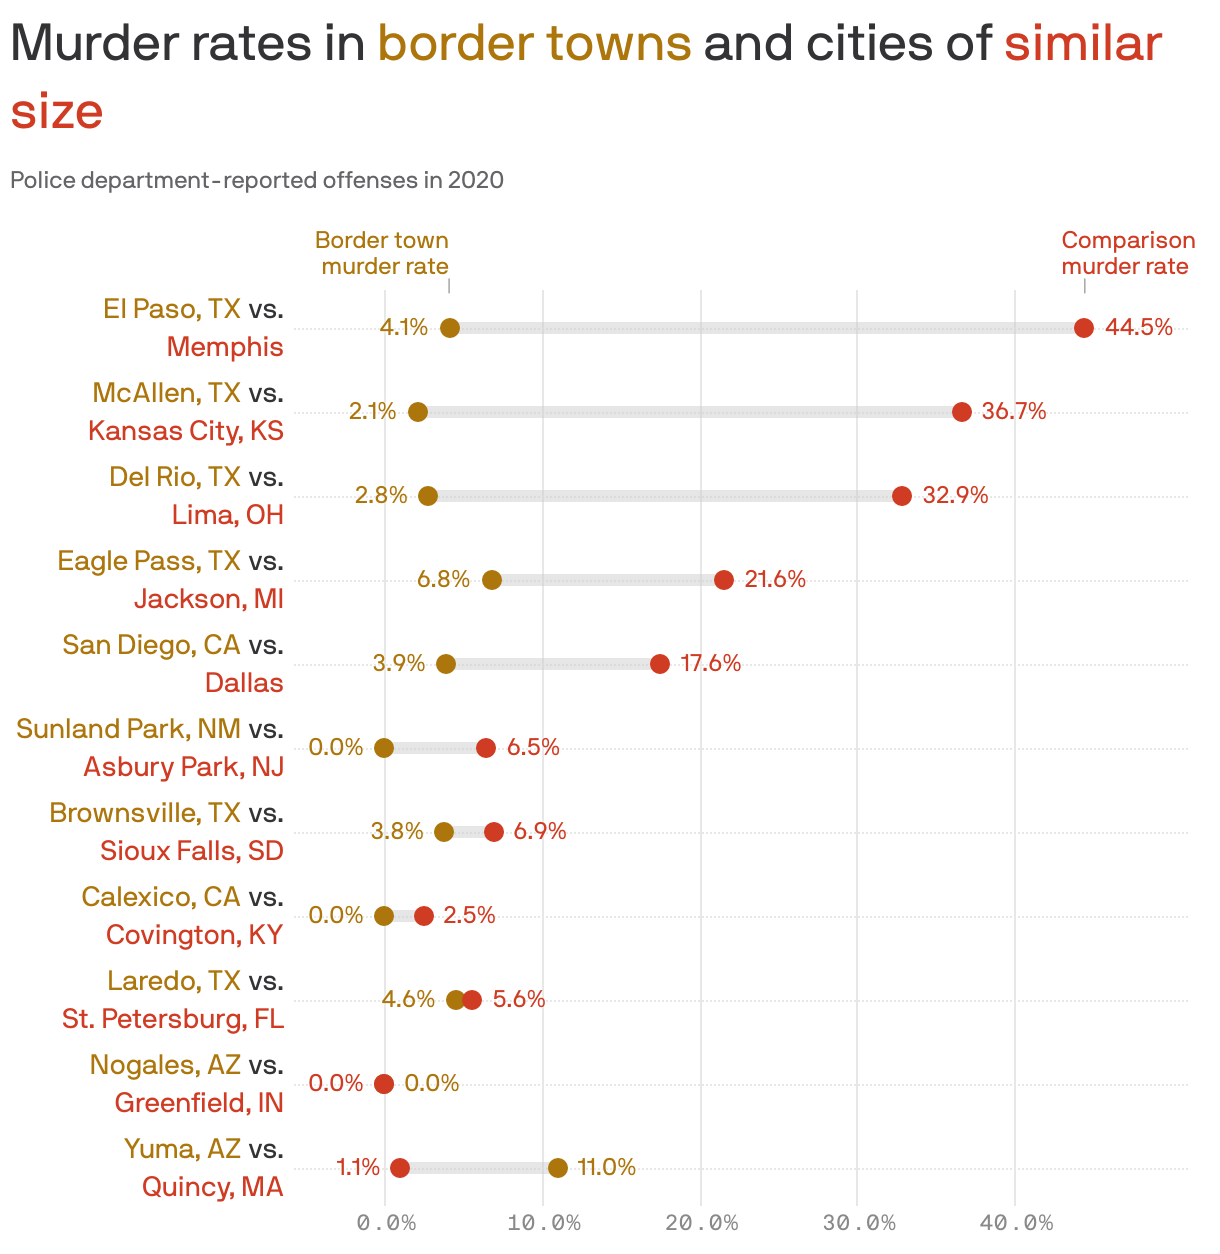 Murder rates in border towns and cities of